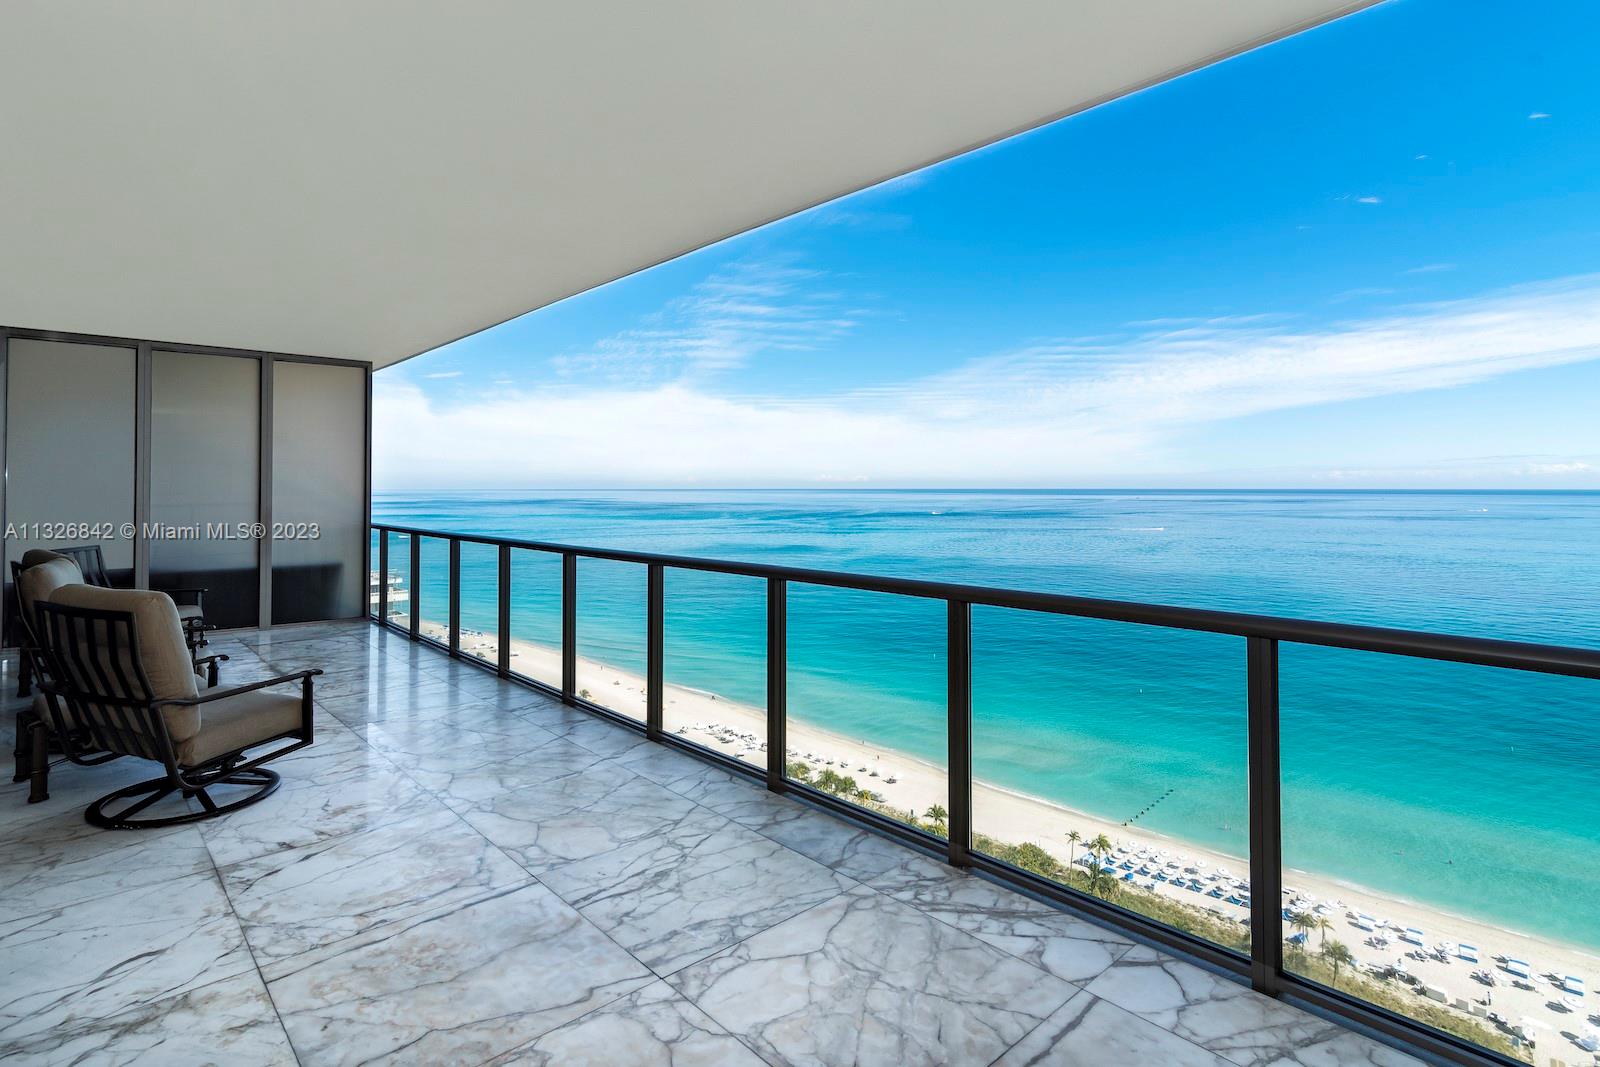 This magnificent 3,688 sqft residence features 4 bedrooms, 4 full baths, and 2 half baths. Two combined units span the entire length of the building, with floor-to-ceiling windows in each room providing breathtaking views of the ocean, intracoastal, and cityscape. Every detail has been carefully crafted with exquisite design, resulting in an unparalleled level of sophistication. Offered furnished with an abundance of designer appointments, this property is located in the iconic St. Regis Bal Harbour, across from the world-renowned Bal Harbour Shops. Enjoy the ultimate in luxury living with 5-star hotel and resort amenities, including private pools, concierge services, oceanfront cabanas, and a lavish spa.